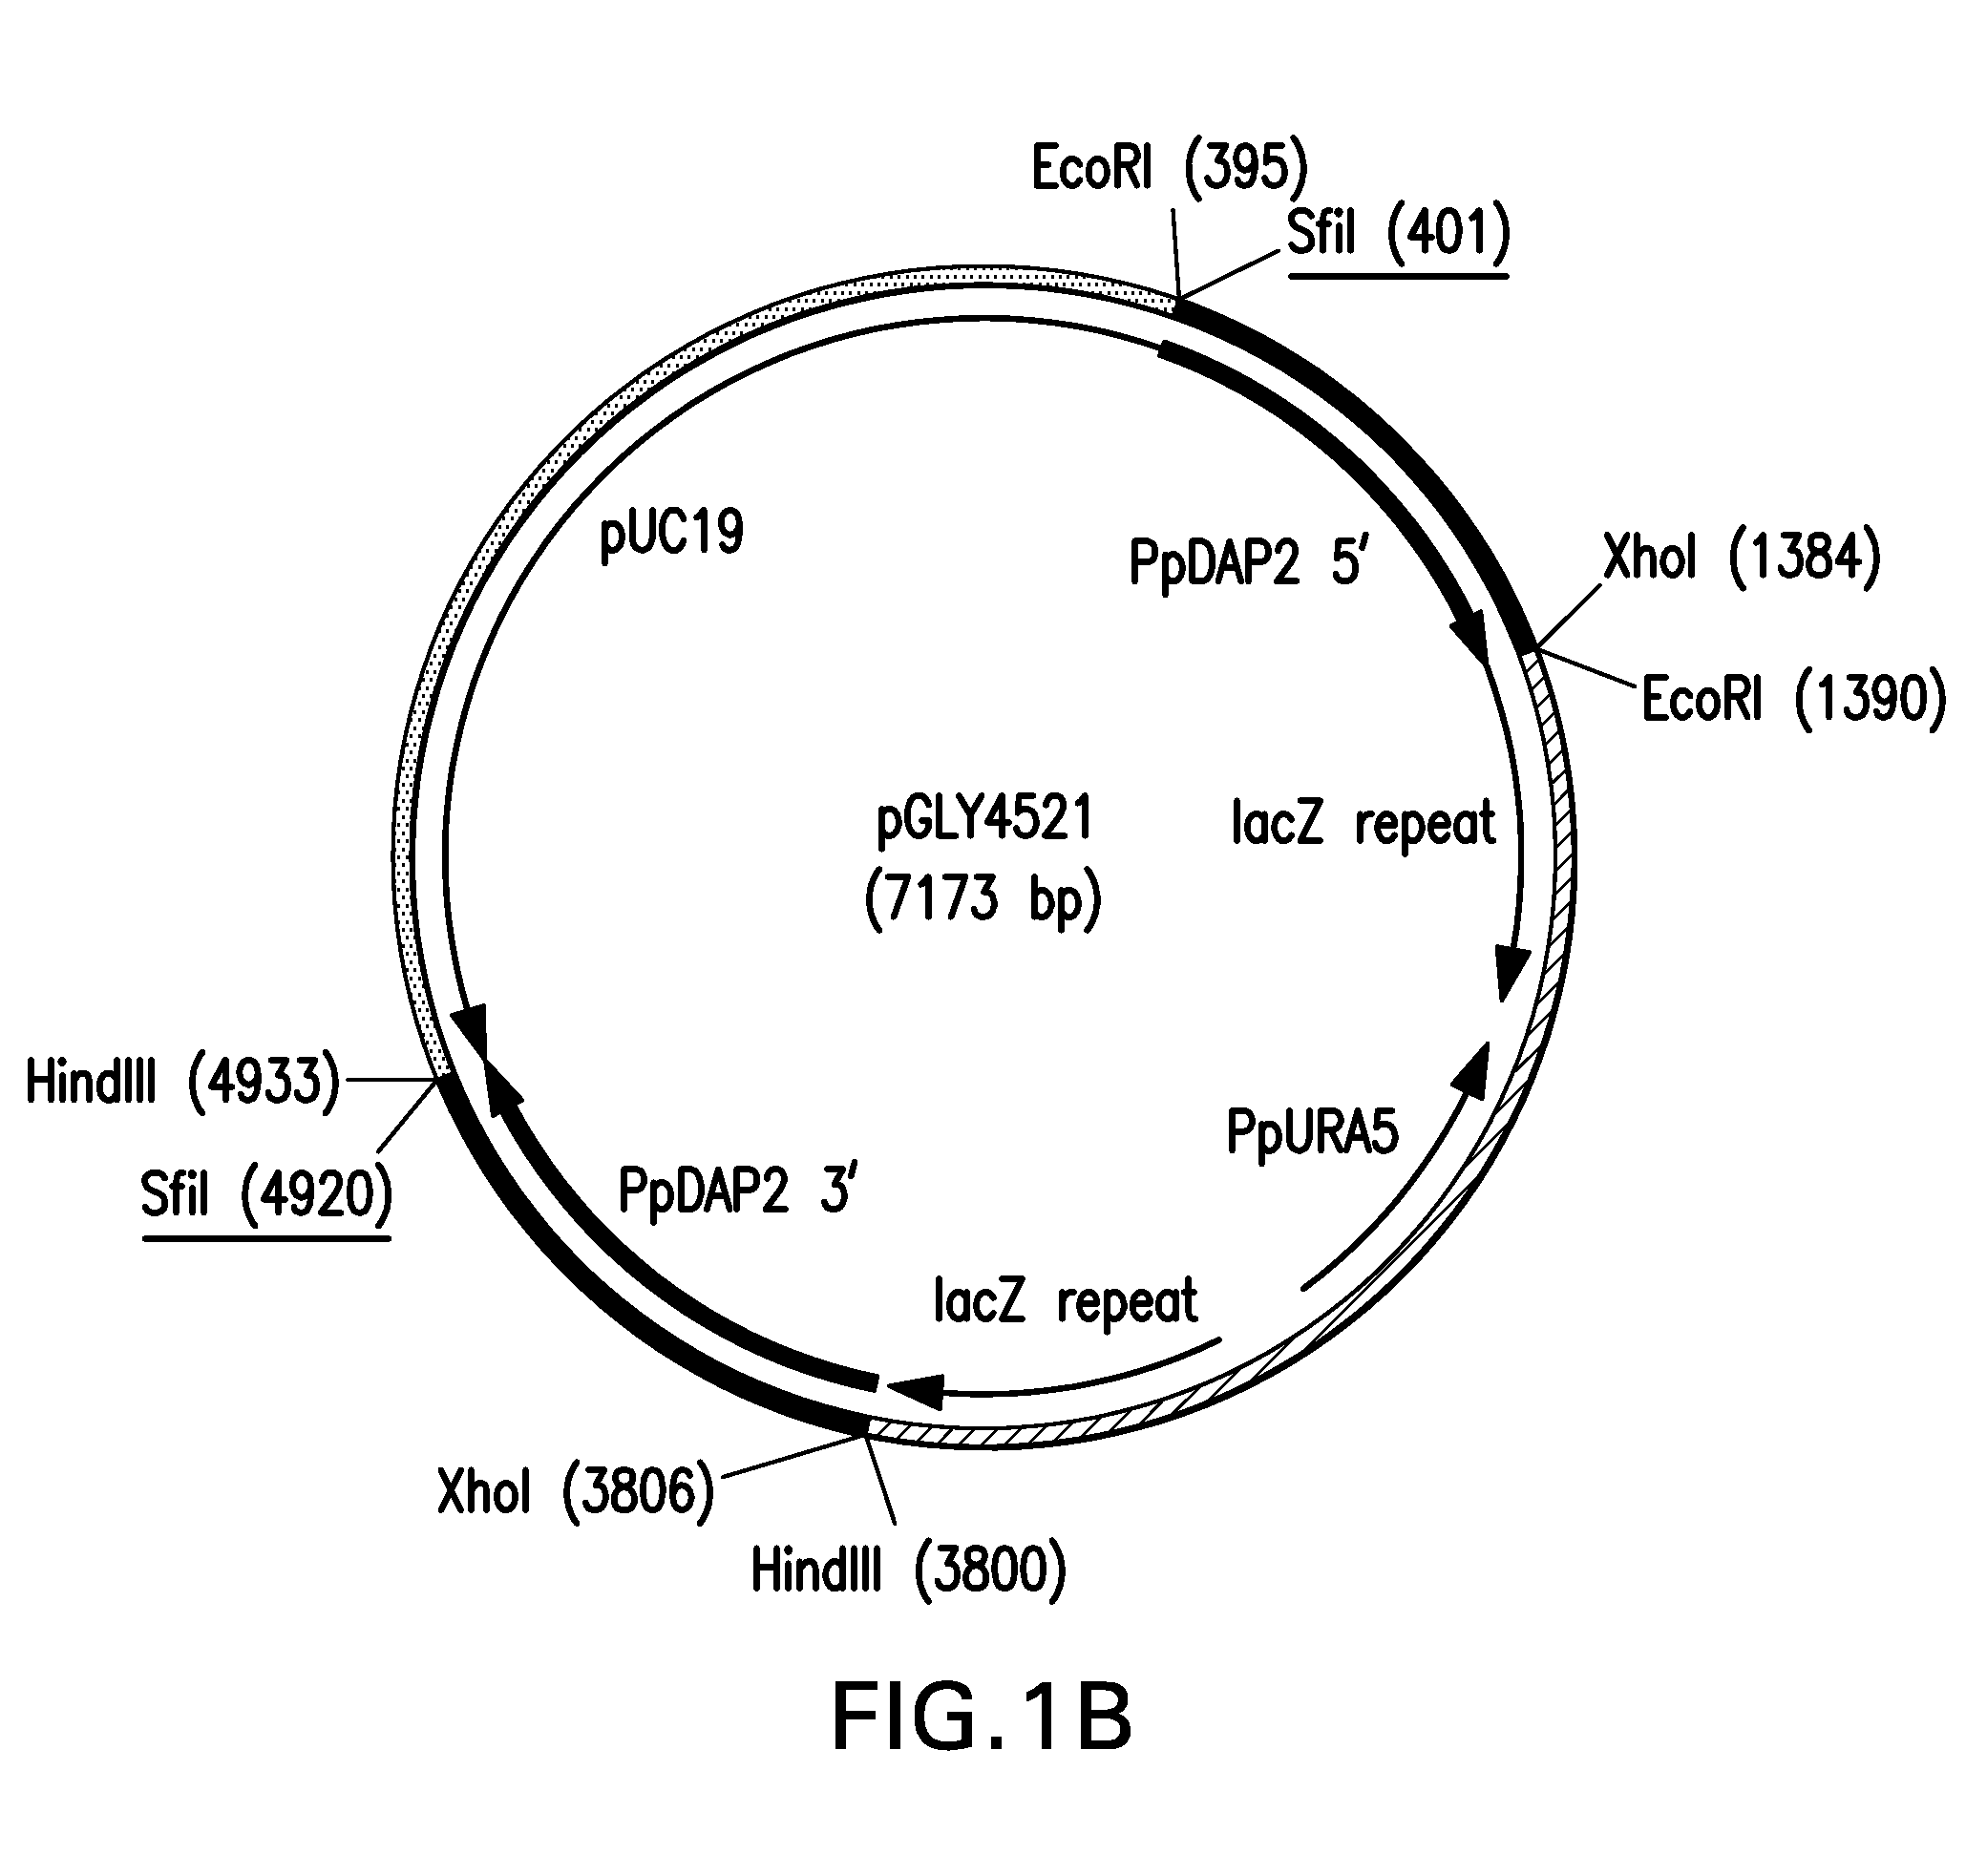 Method for producing therapeutic proteins in pichia pastoris lacking dipeptidyl aminopeptidase activity